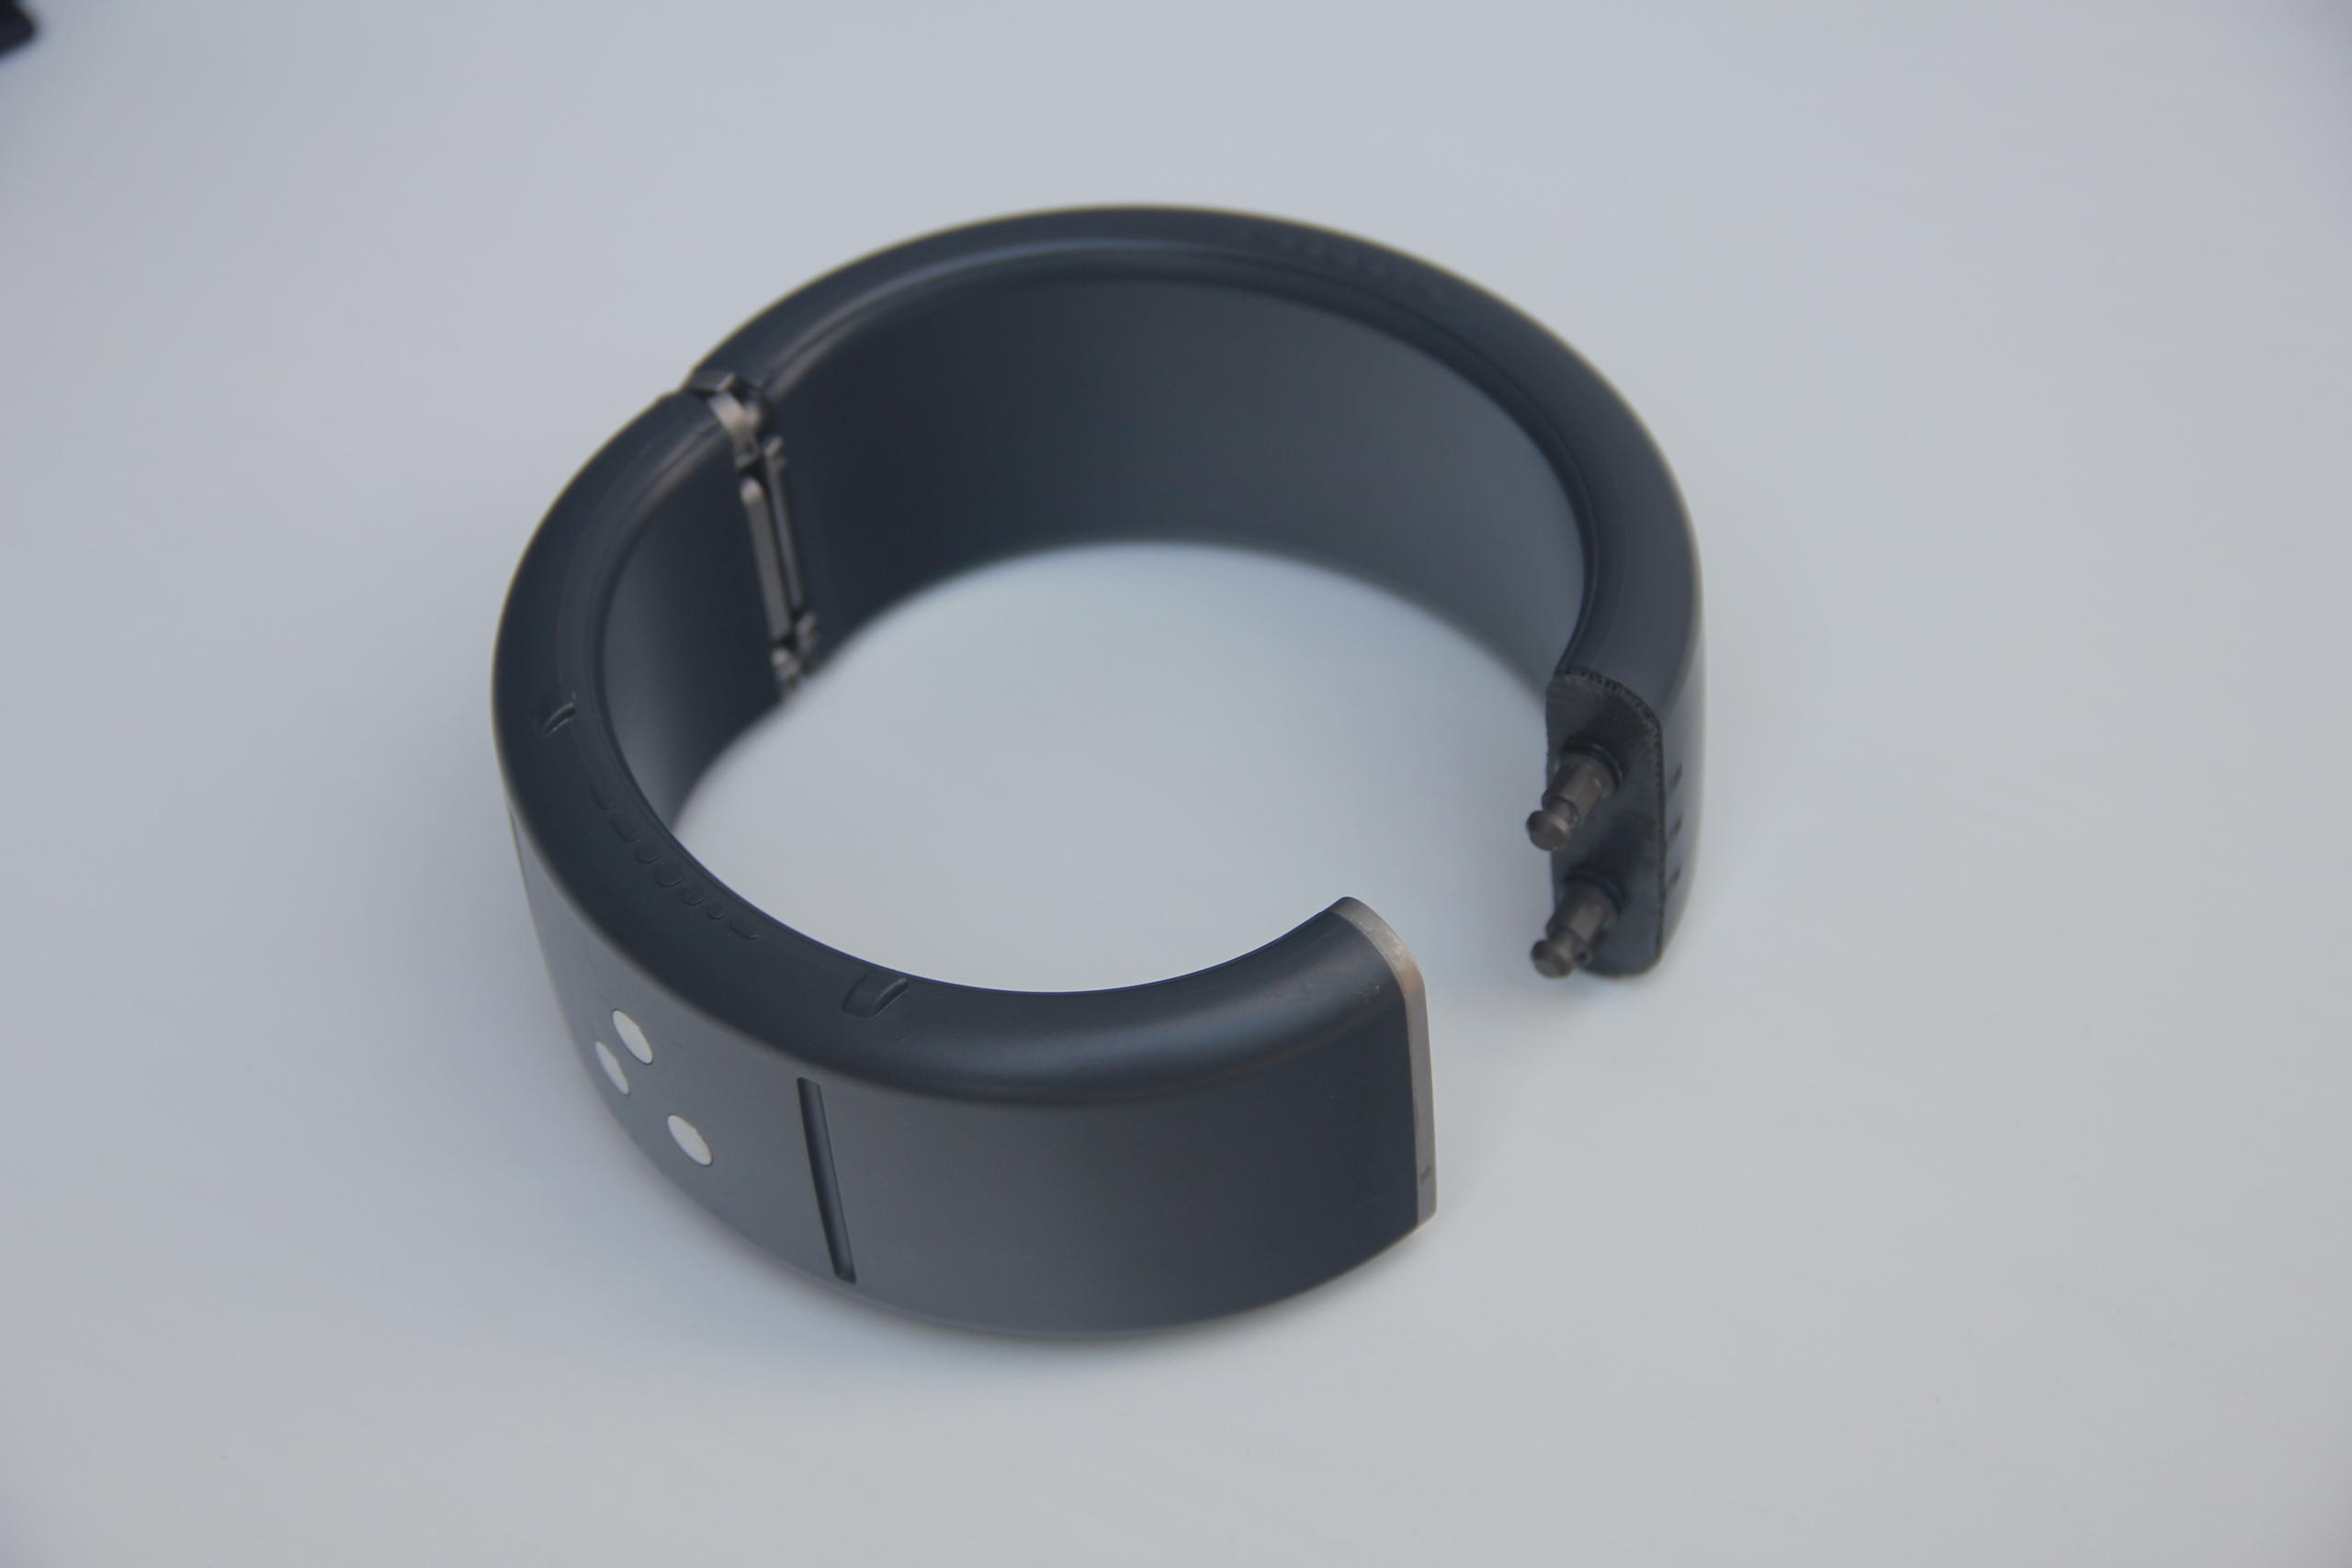 Parents can now monitor teens with GPS ankle bracelets